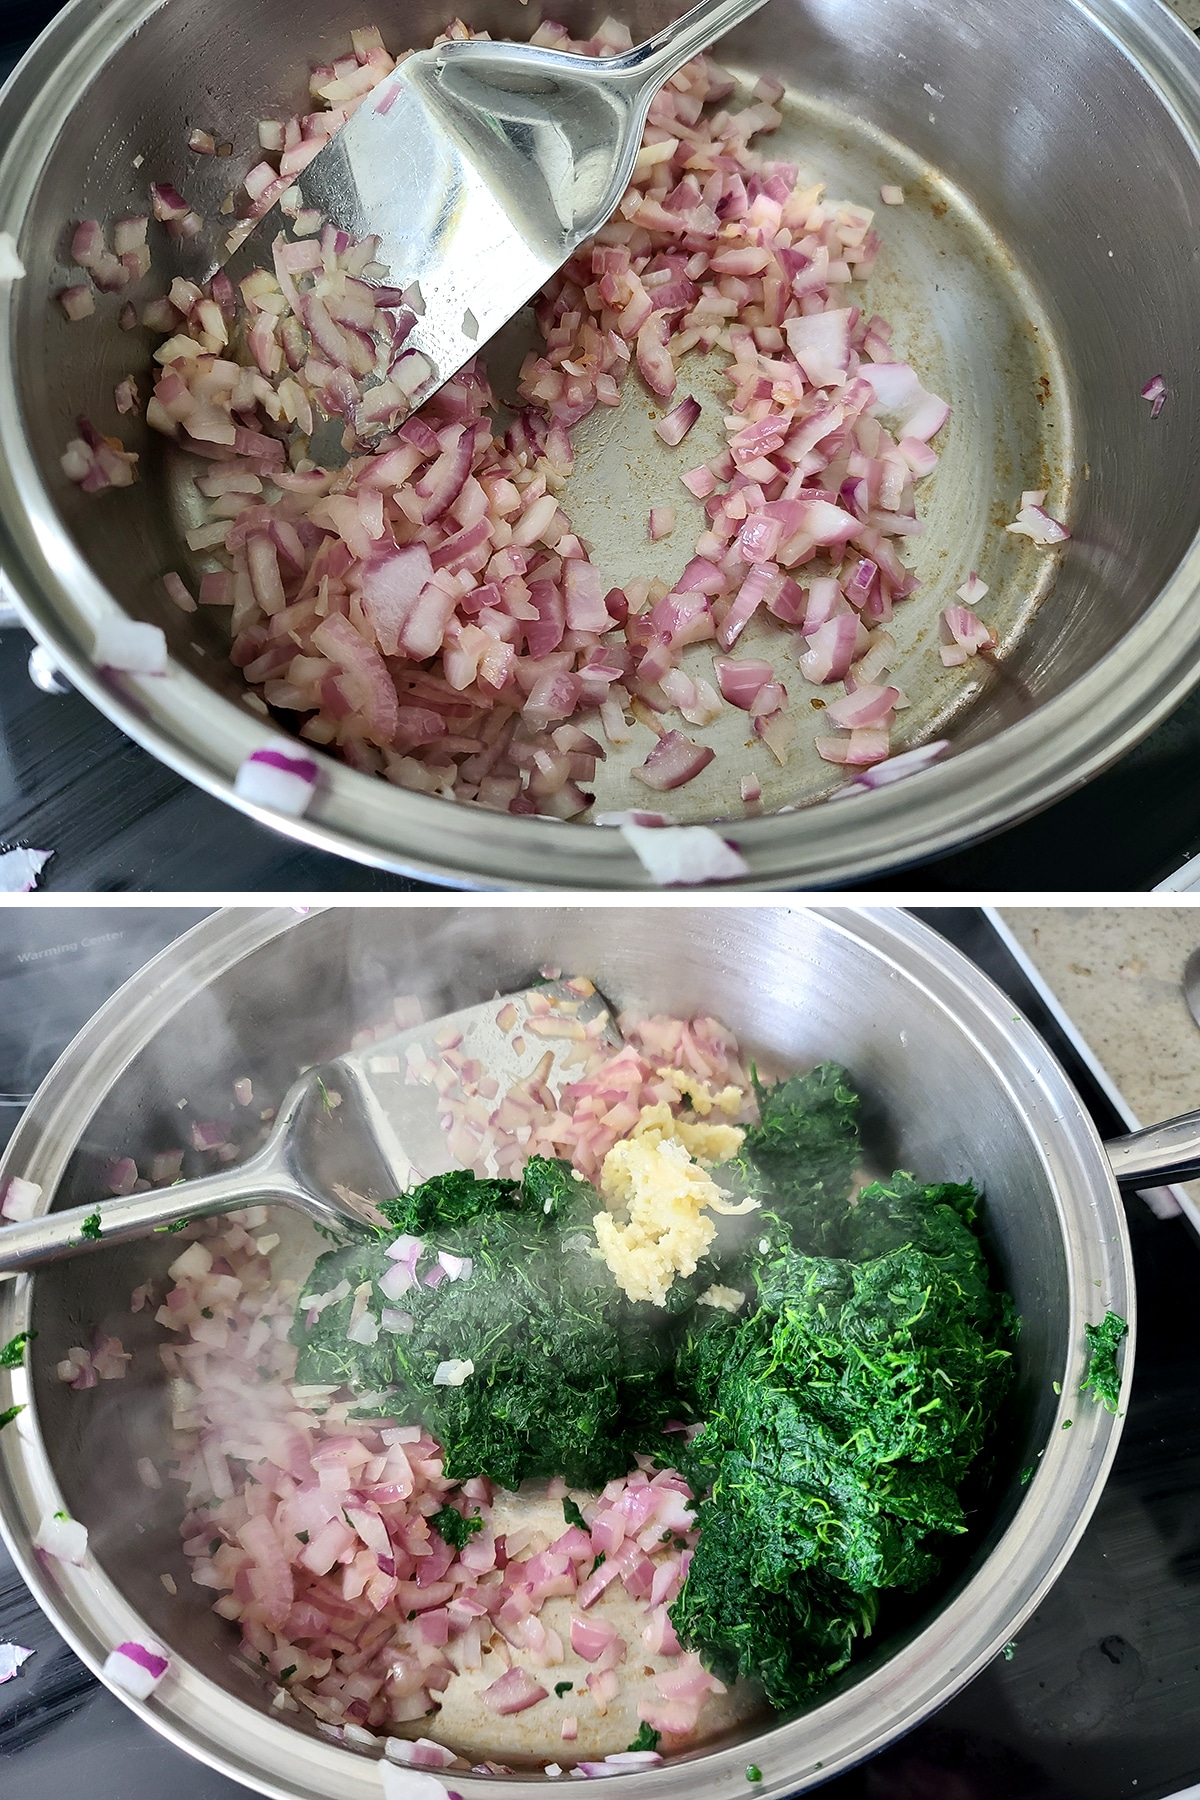 A two part image showin the red onions being sauteed, then with spinach and garlic added to the pan.